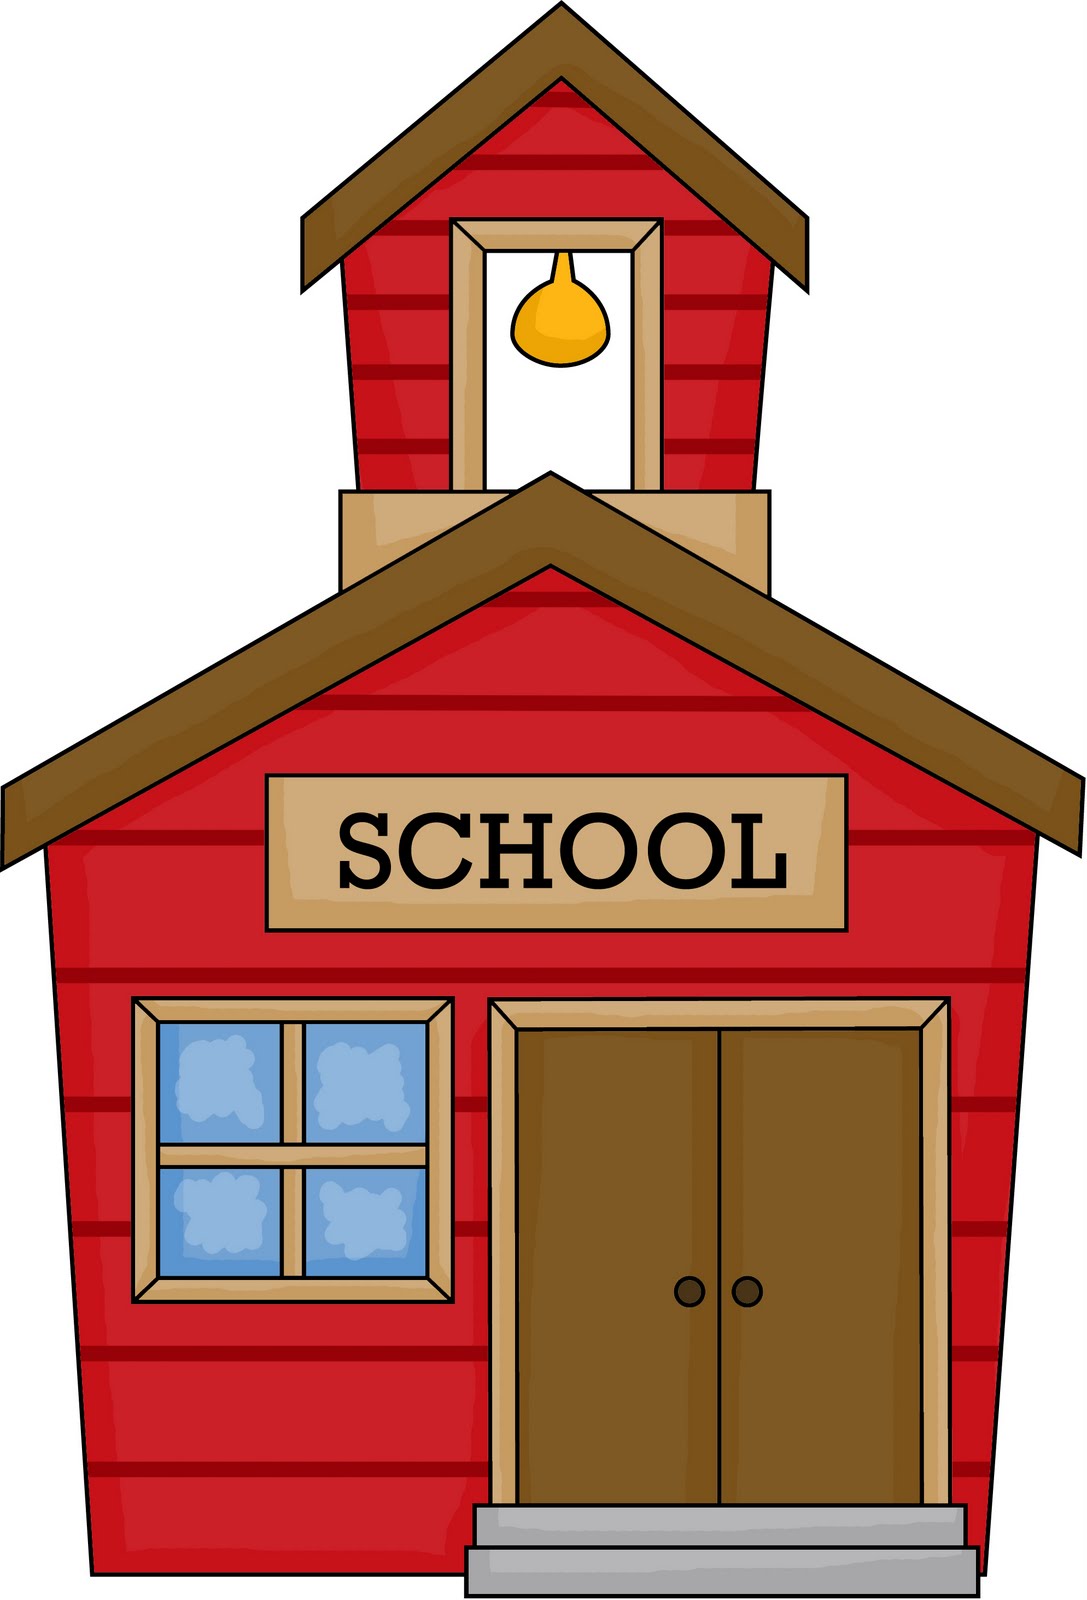 clipart of school. school house images